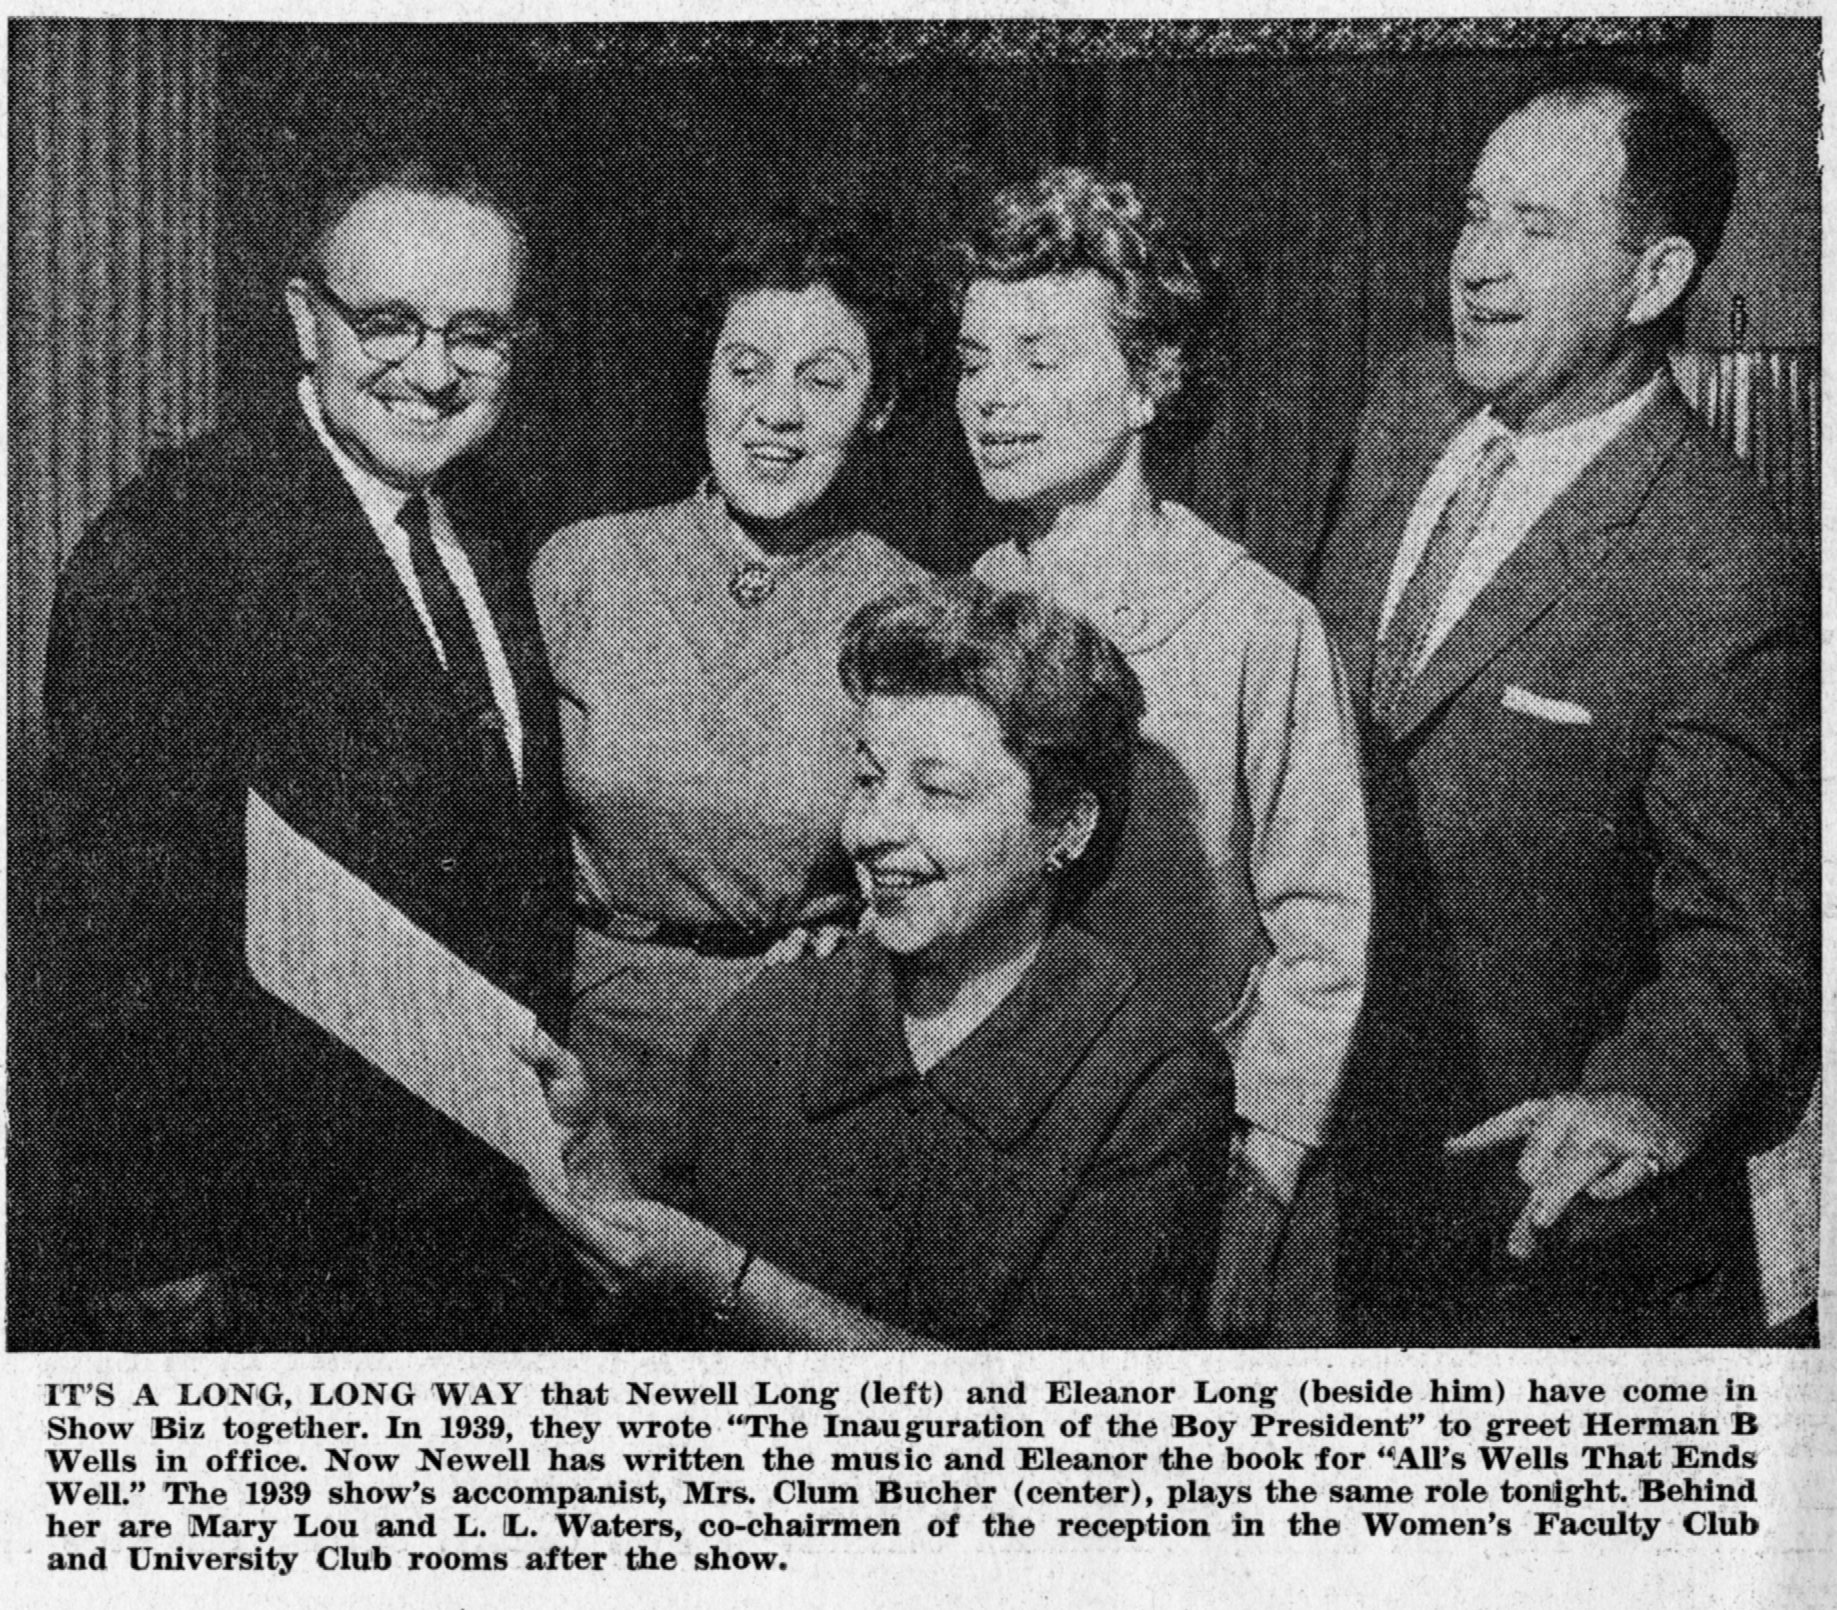 Left to Right: Newell Long, Eleanor Long, Mary Lou Waters, L.L. Water, Mrs. Clum Bucher (Center)